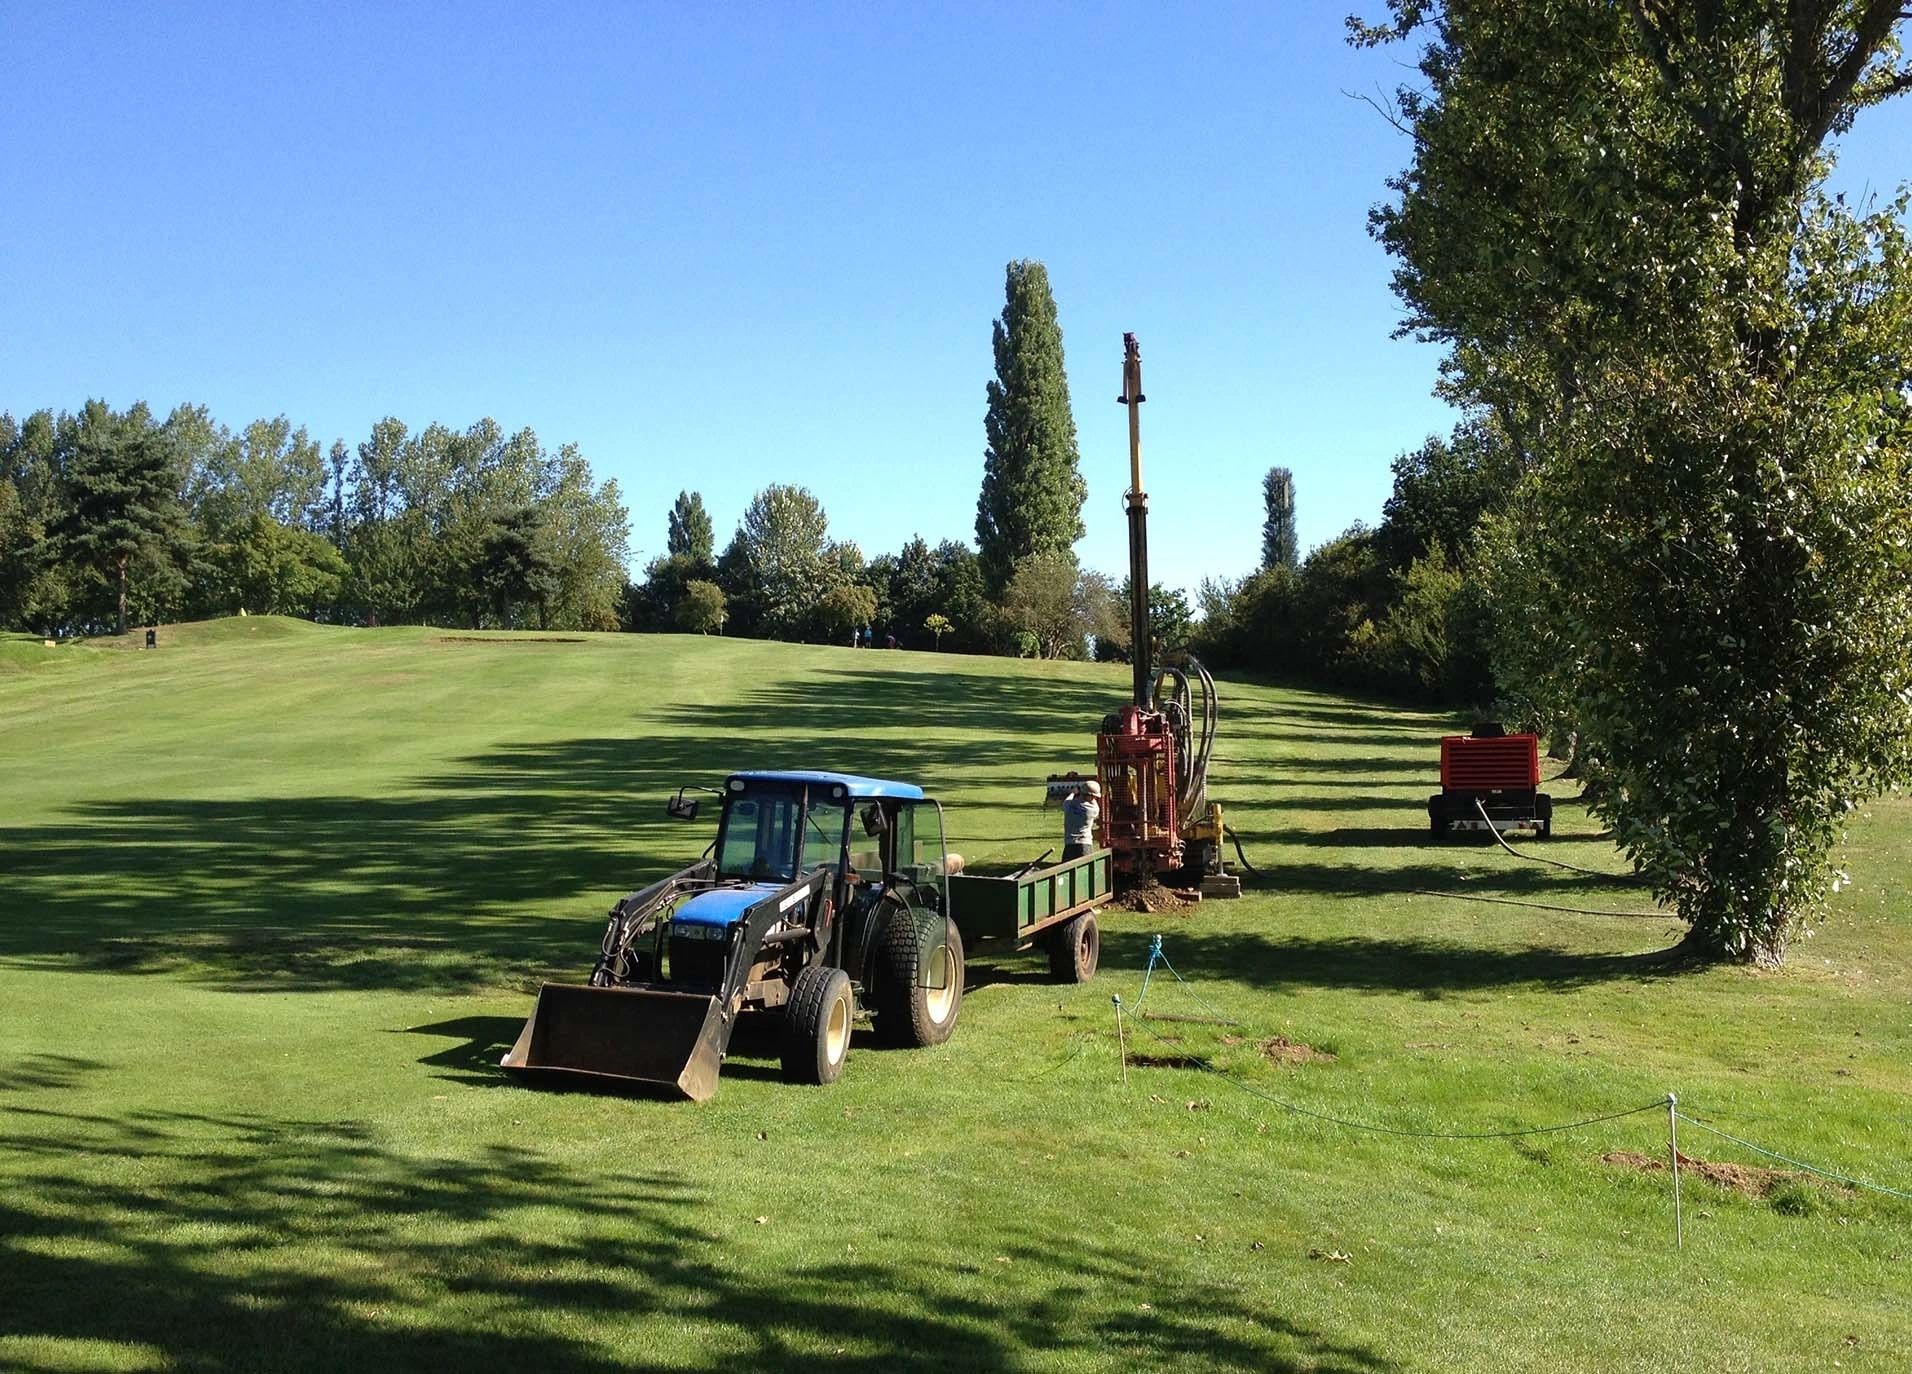 A water bore hole being installed on a golf course